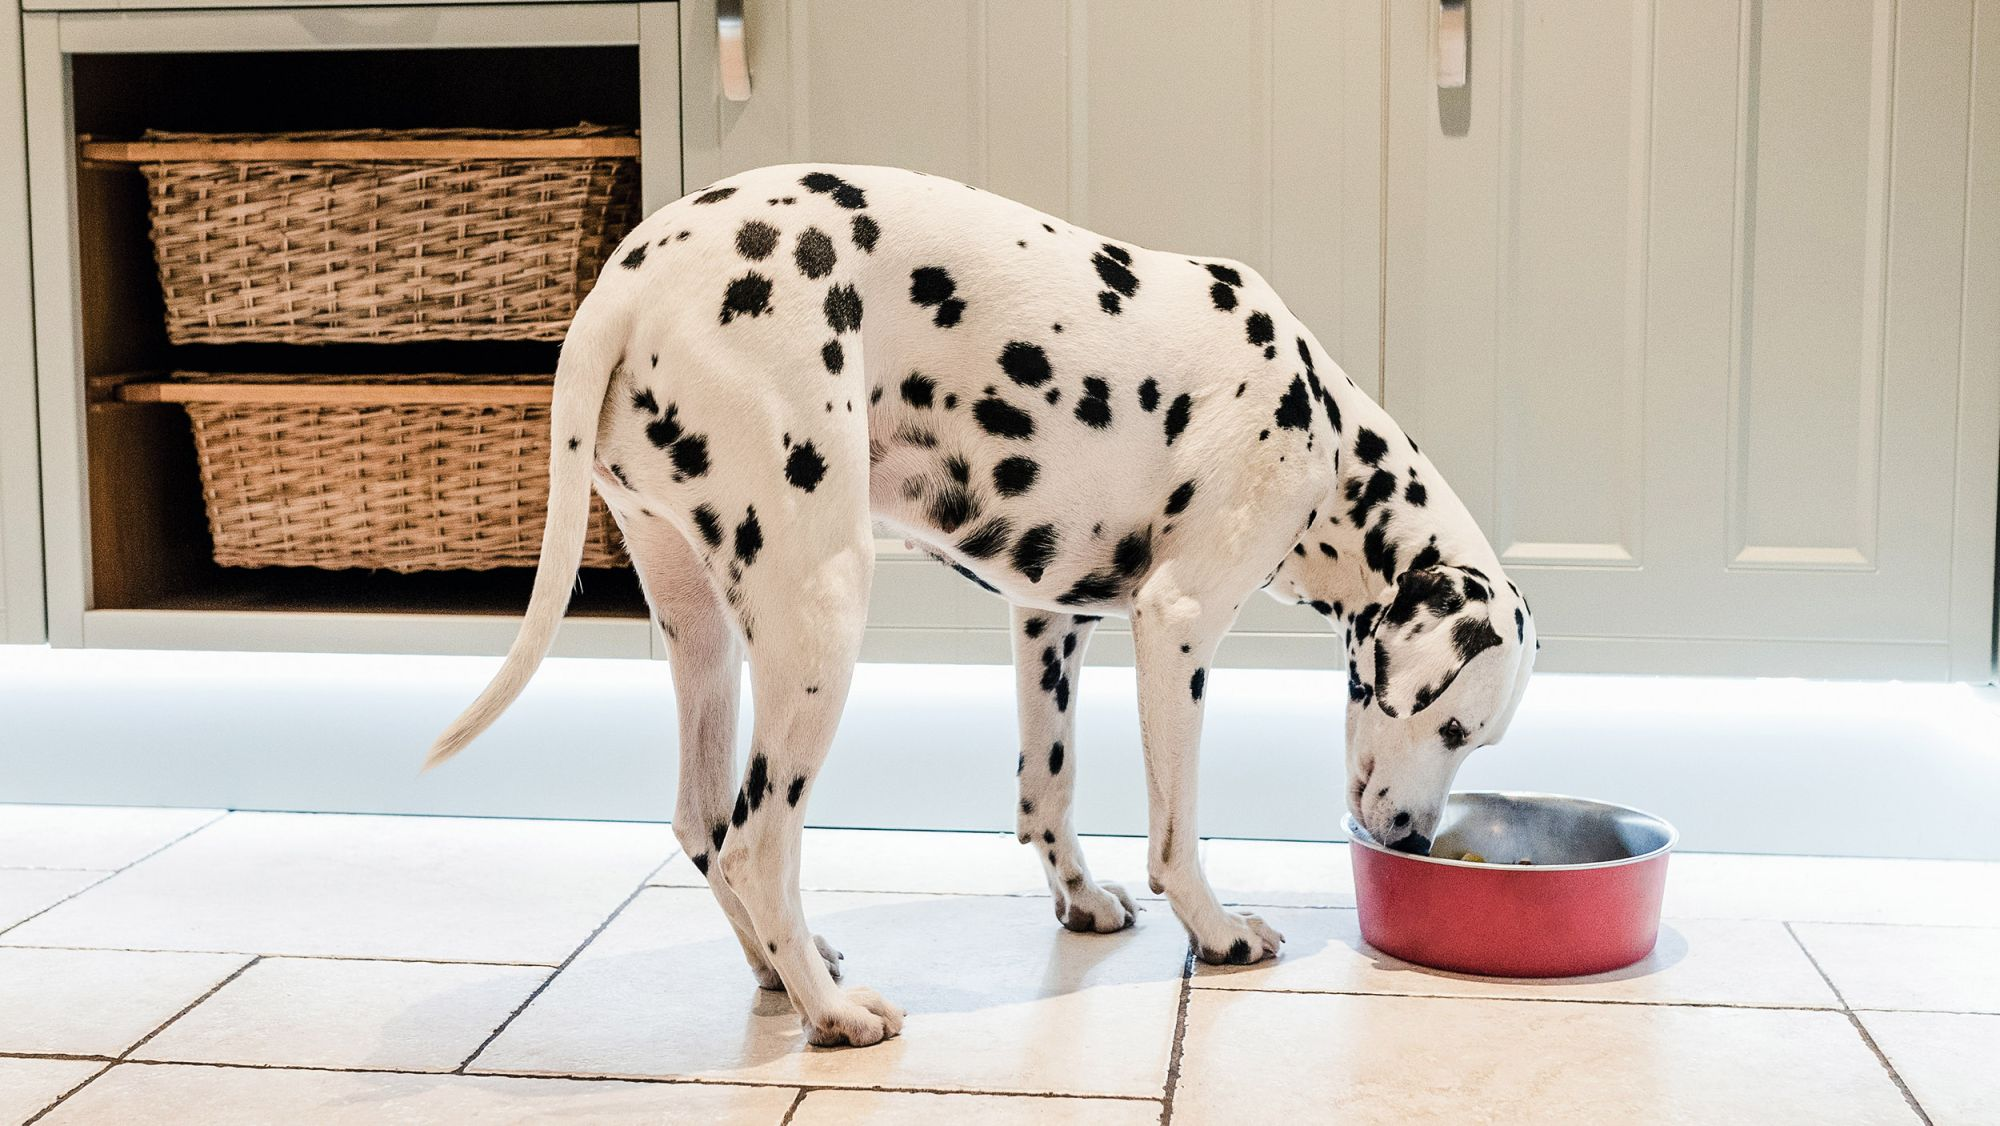 Dalmatian adult standing in a kitchen eating from a red bowl.